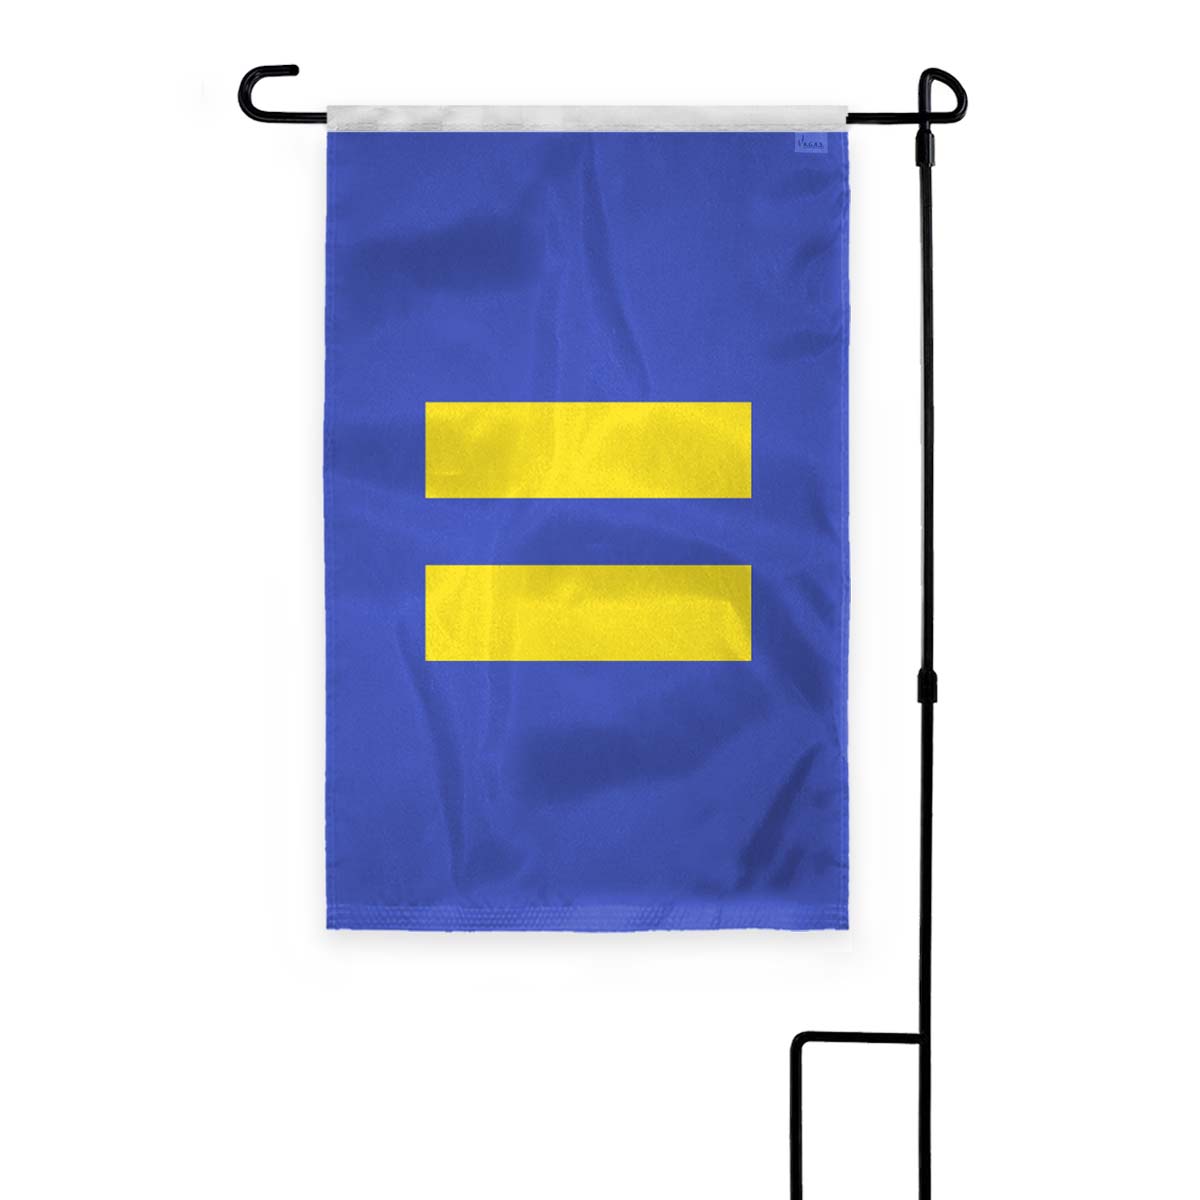 AGAS Equality Pride Garden Flag 12x18 inch - Printed on Outdoor 200D Nylon